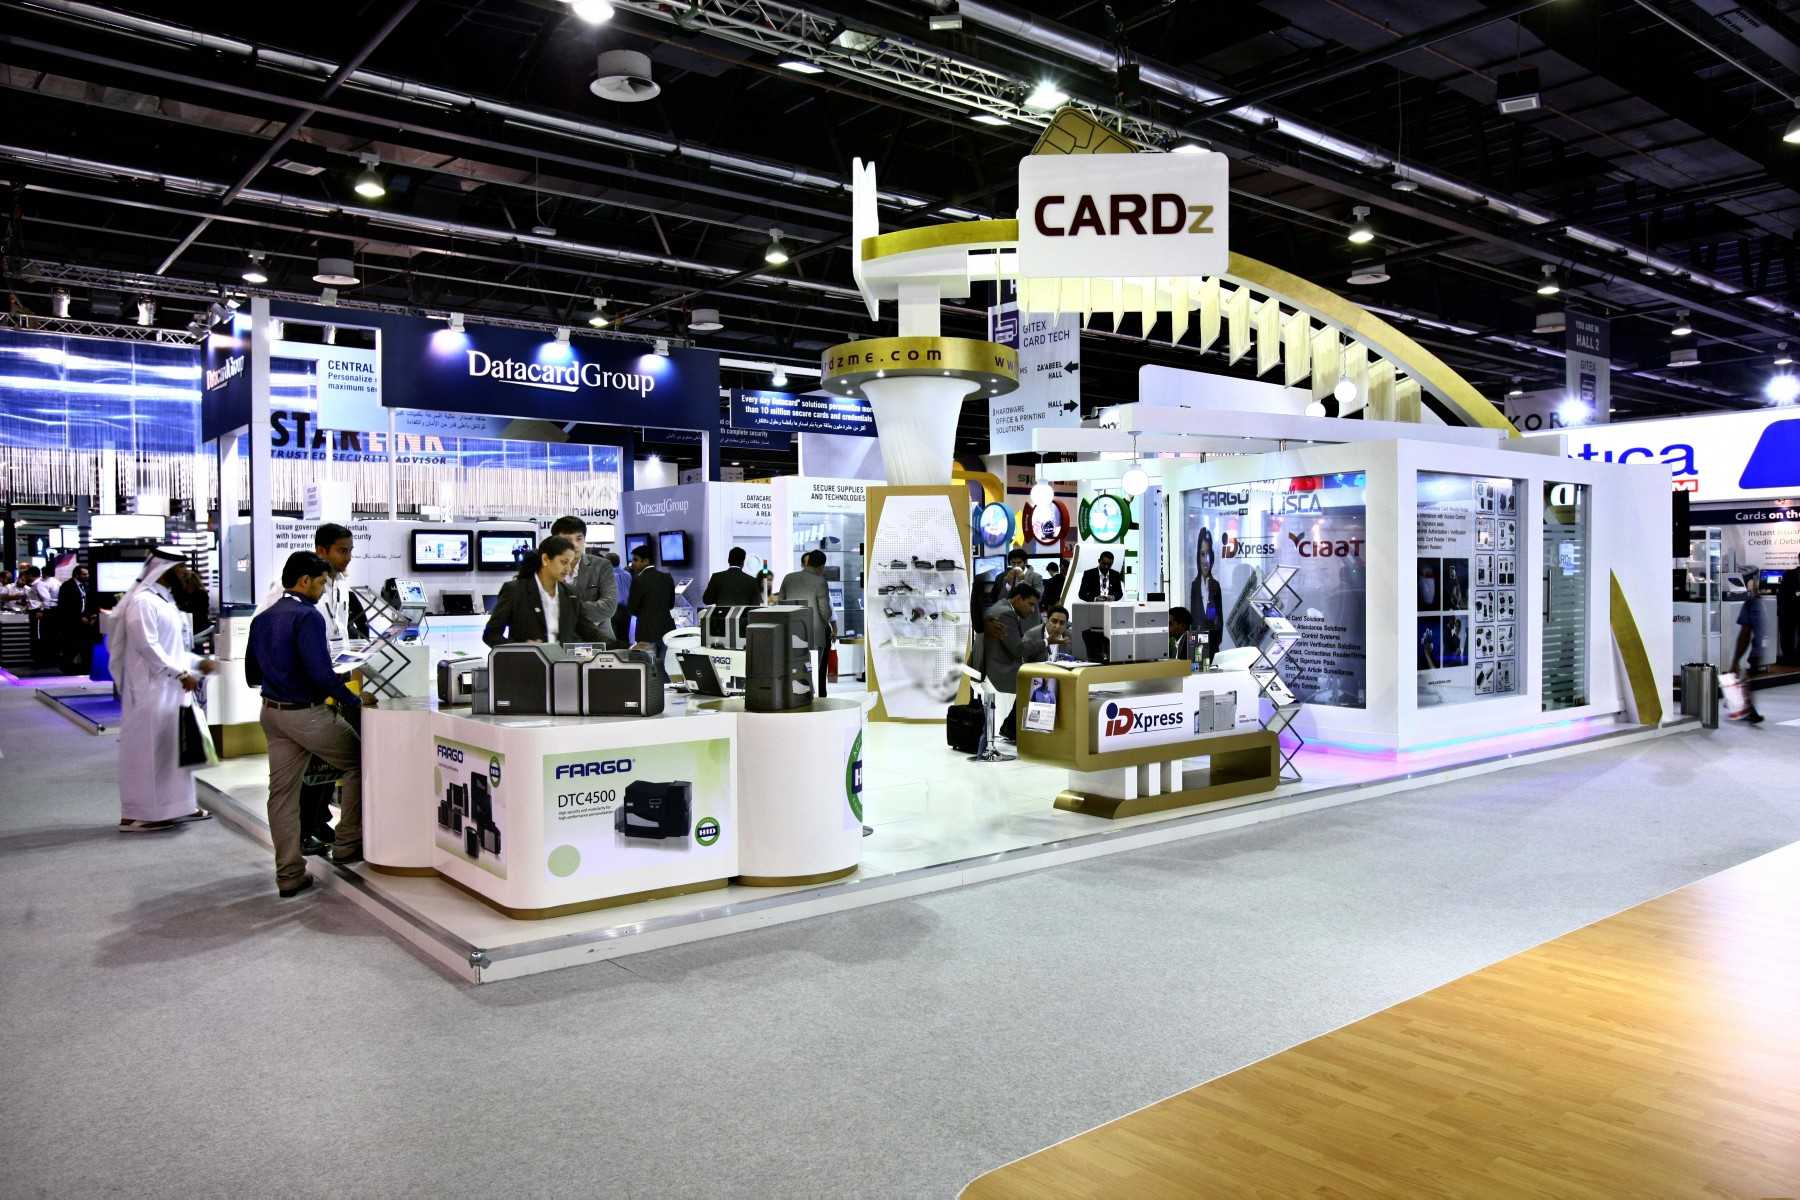 How to Develop a Theme to Promote Your Exhibition Stand